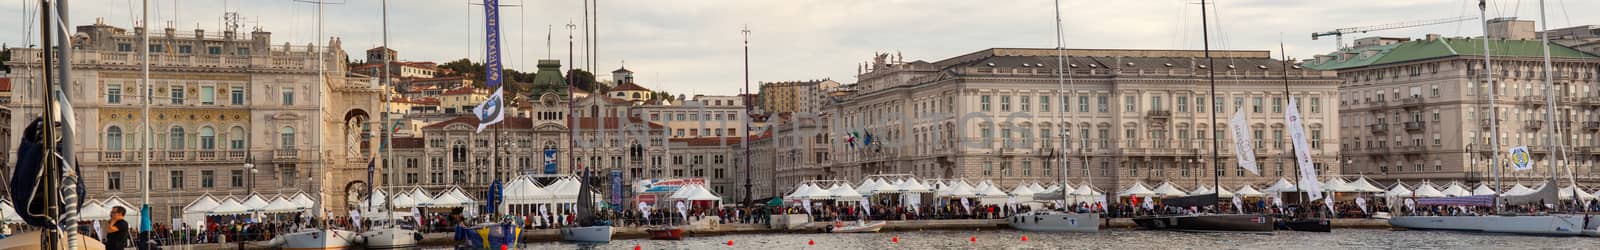 TRIESTE, ITALY - OCTOBER, 11: View of Trieste during the time of 45. Barcolana regatta on October 11, 2013